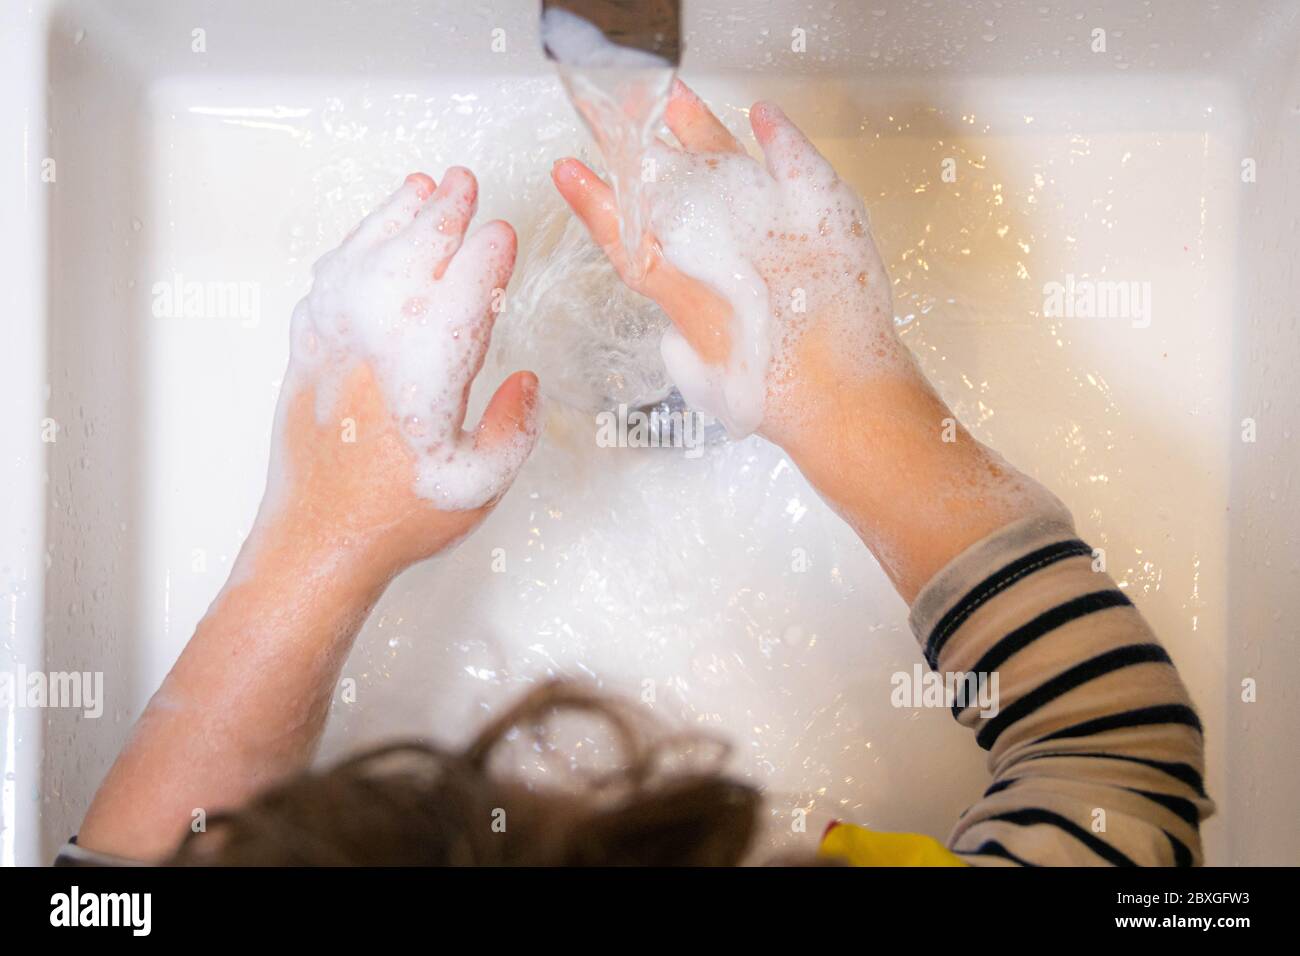 Overhead view of a girl washing her hands Stock Photo